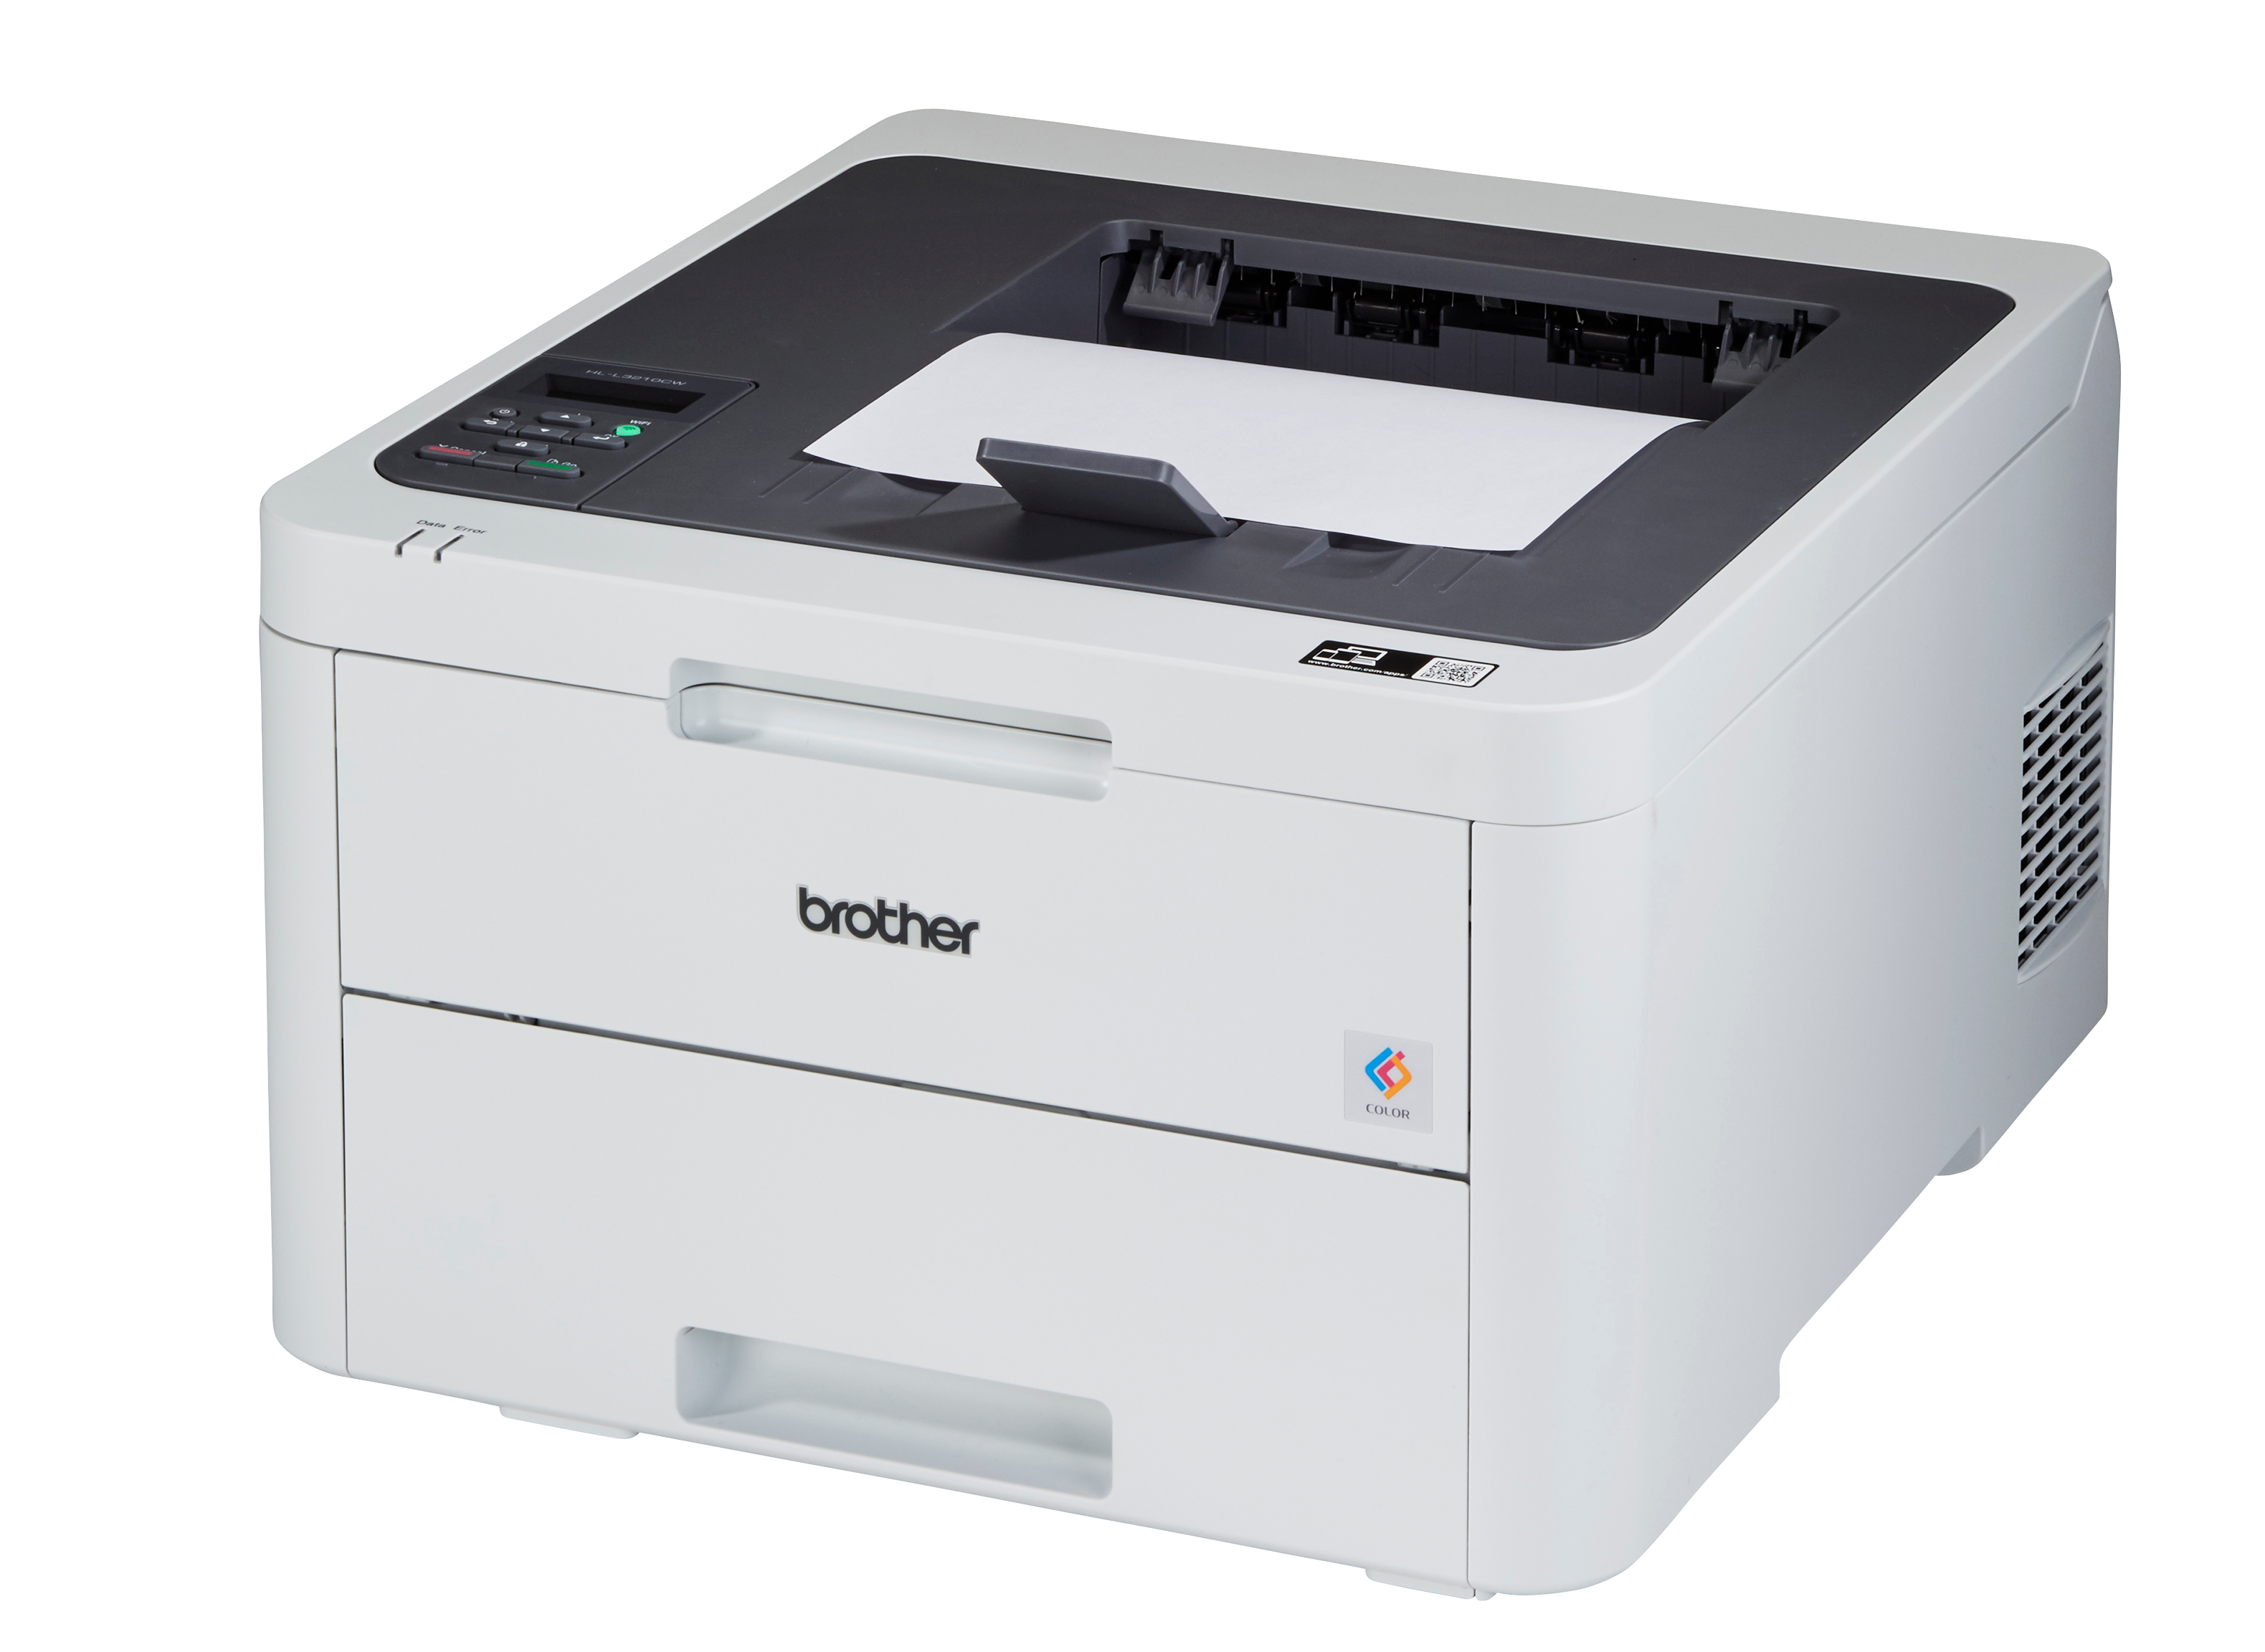 Brother HL-L3210CW Printer Review - Consumer Reports